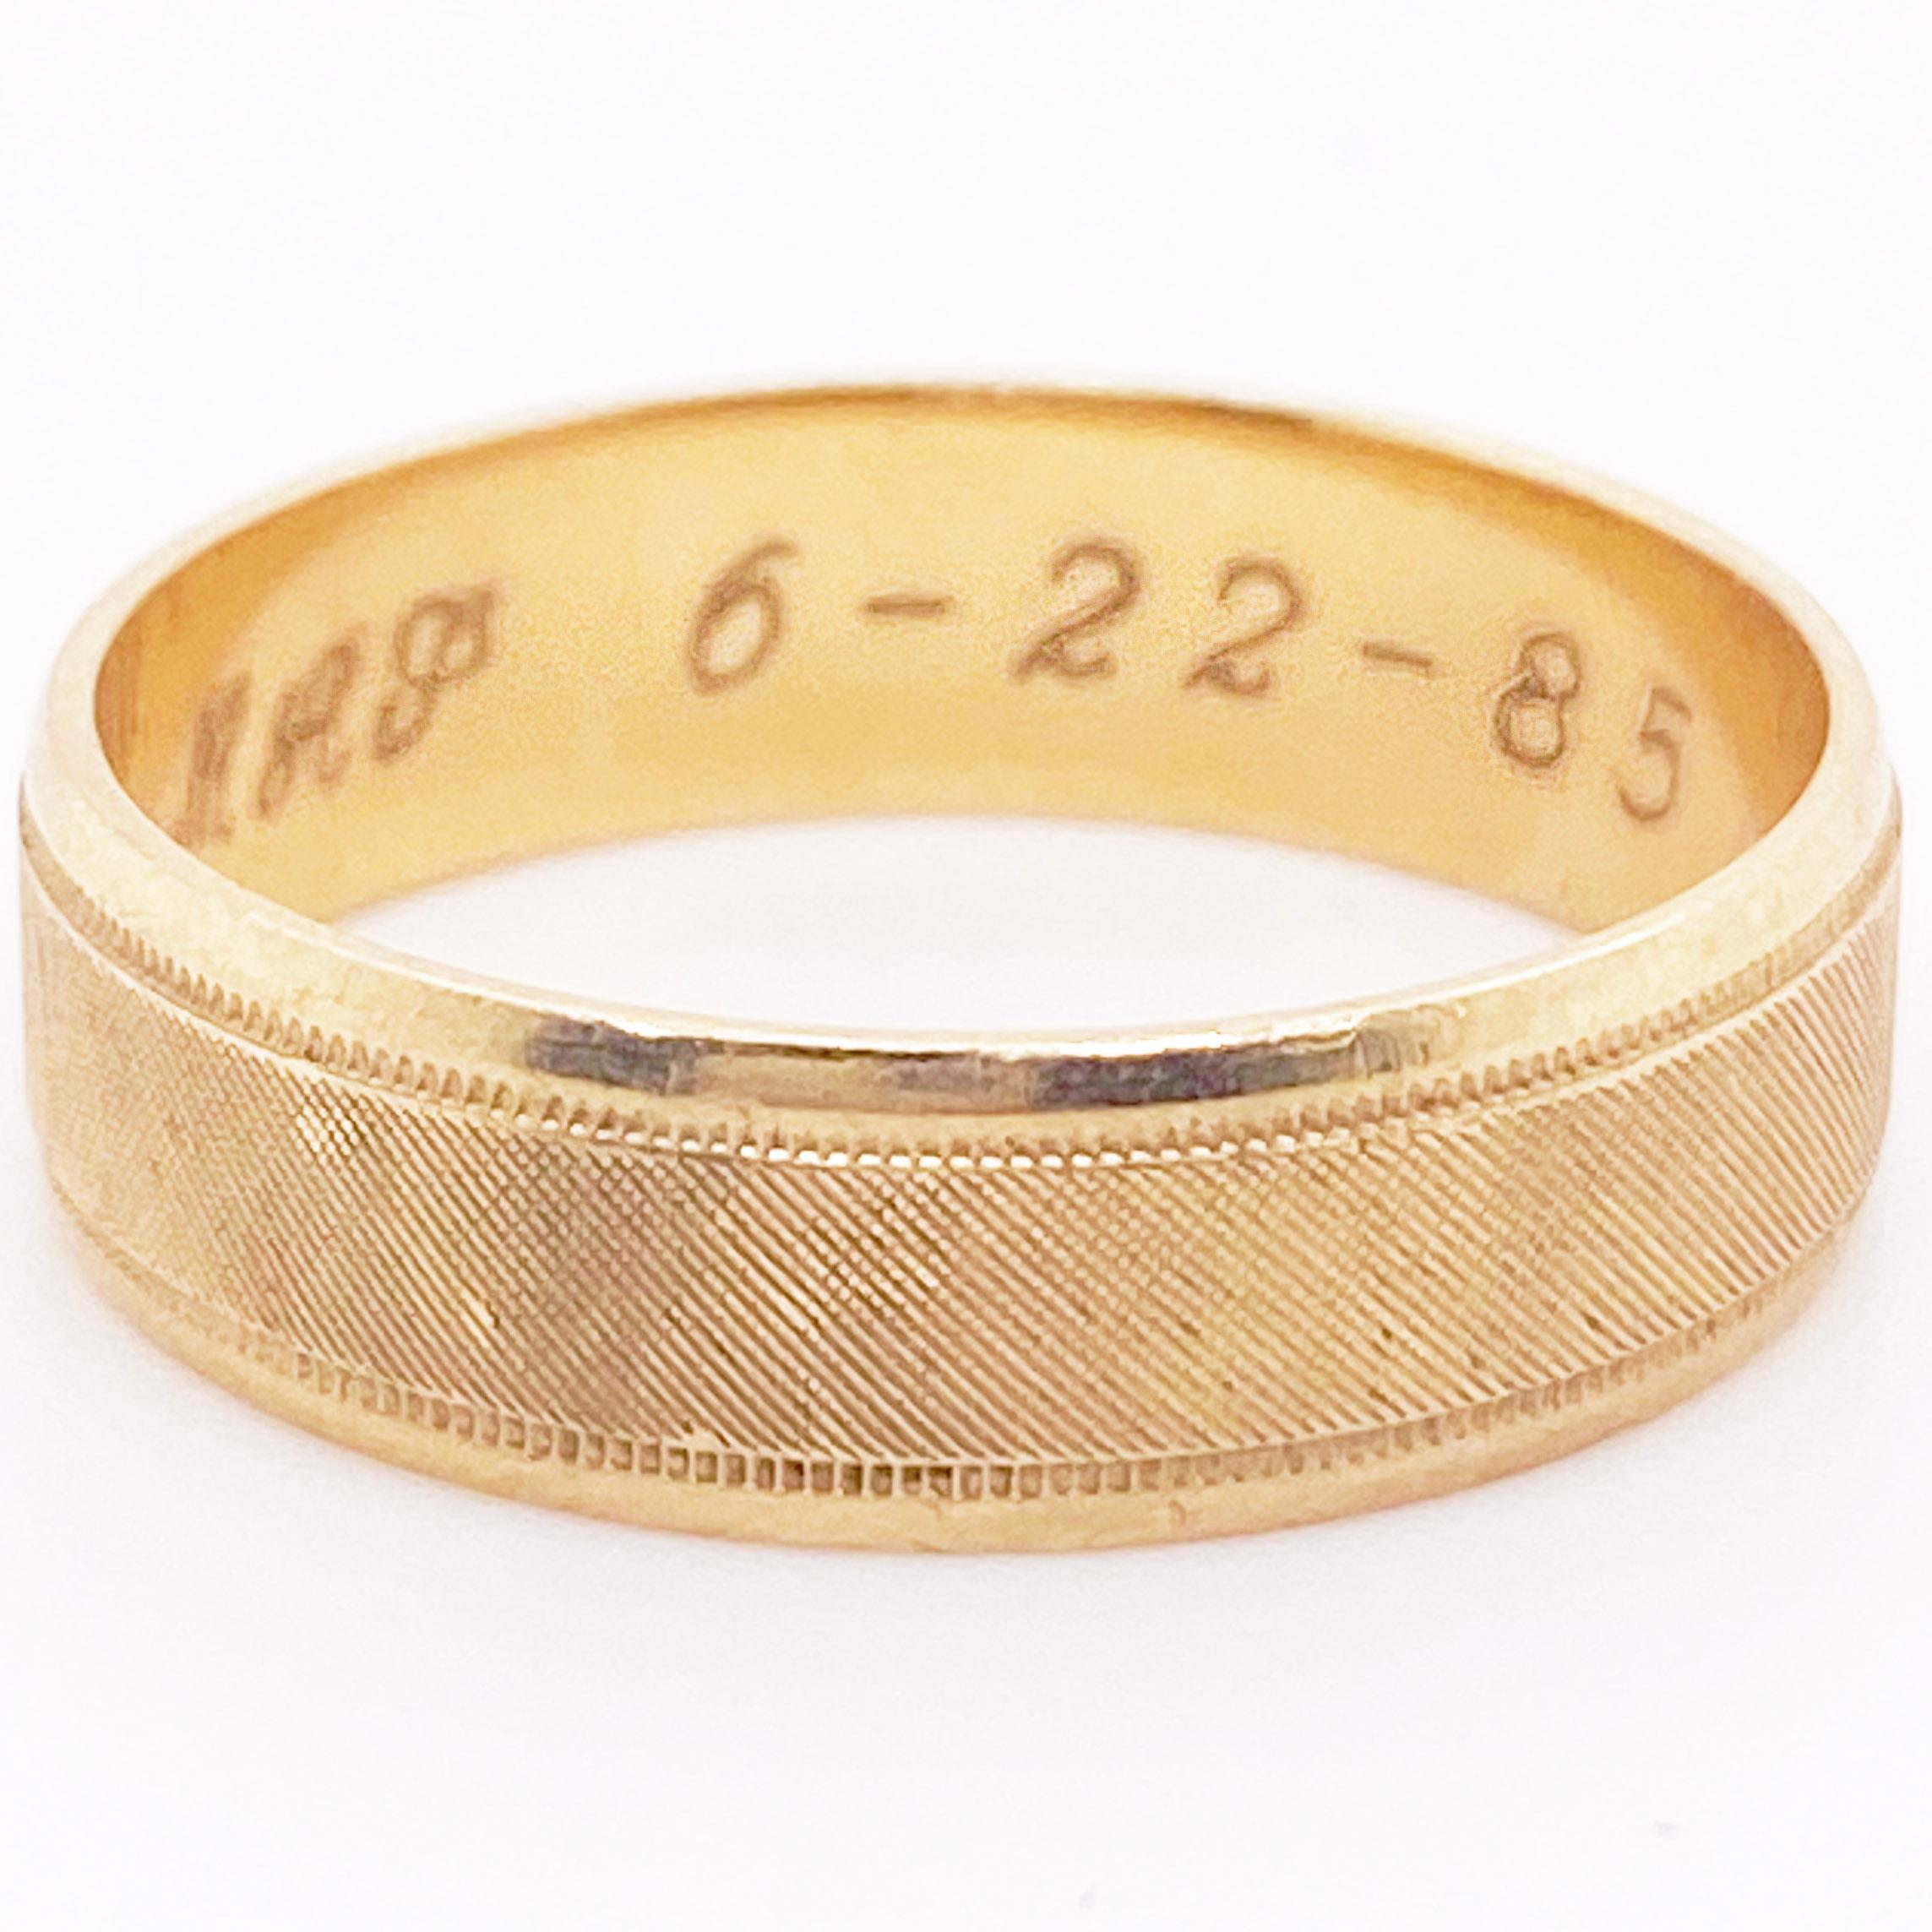 This vintage circa 1985 ring is made of solid 18 karat yellow gold and is 6 millimeters wide. It has a gorgeous cross florentine finish in the center and high polish on the edges.  The 6 millimeters width is the most popular width for a man’s band.